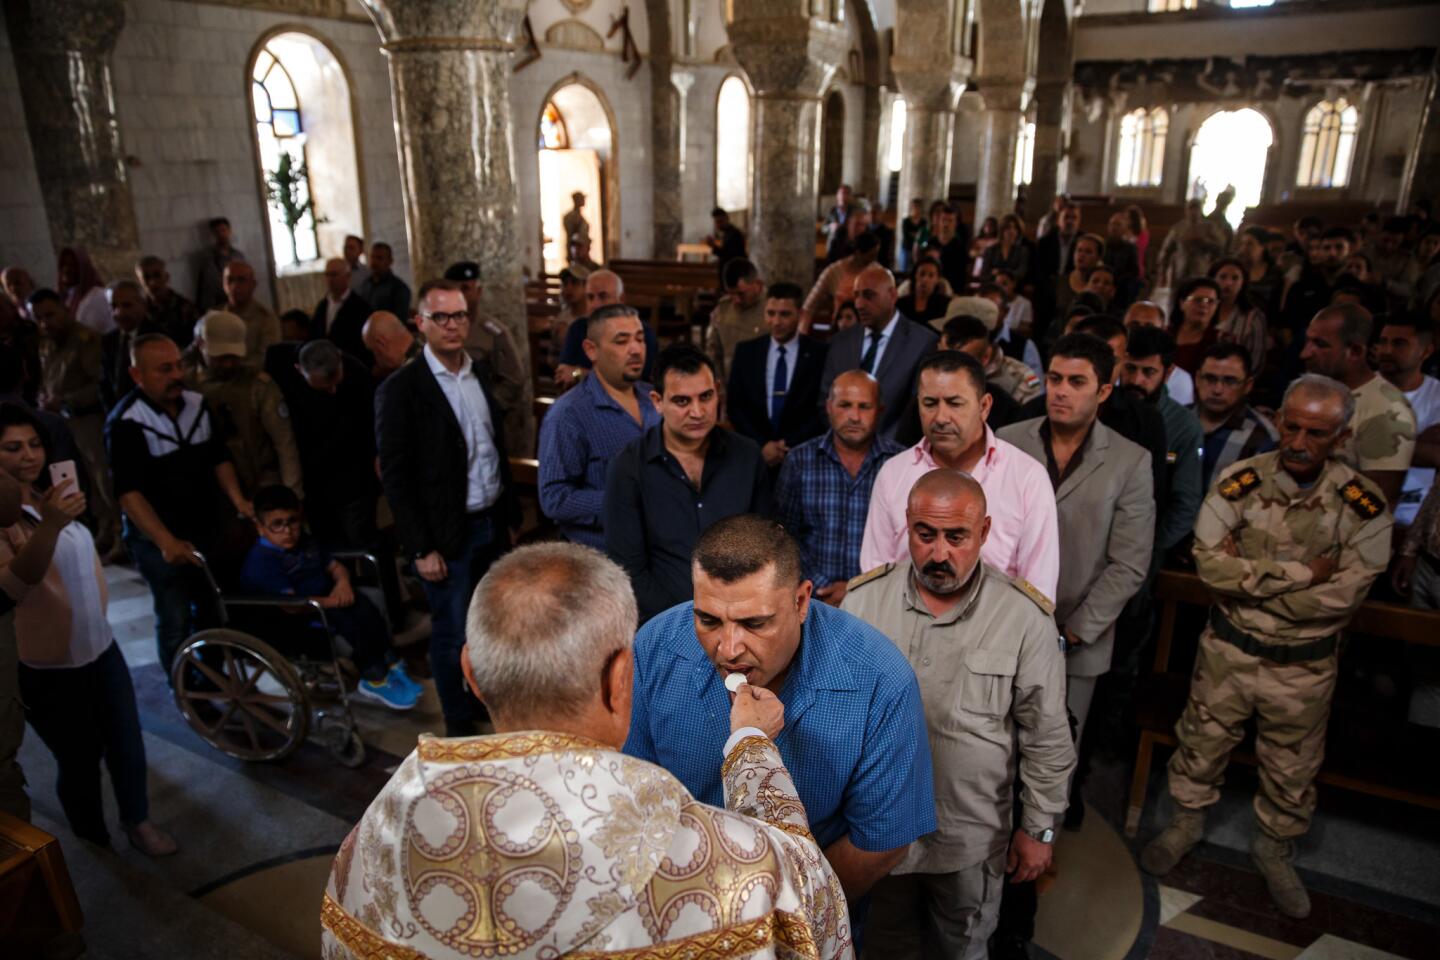 The congregation lines up to receive the holy communion from Abusharnad Alisoo during Easter Mass at the Mary Yohanna Church, damaged in the war when Iraqi forces liberated the city from Islamic State in Qaraqosh, Iraq.